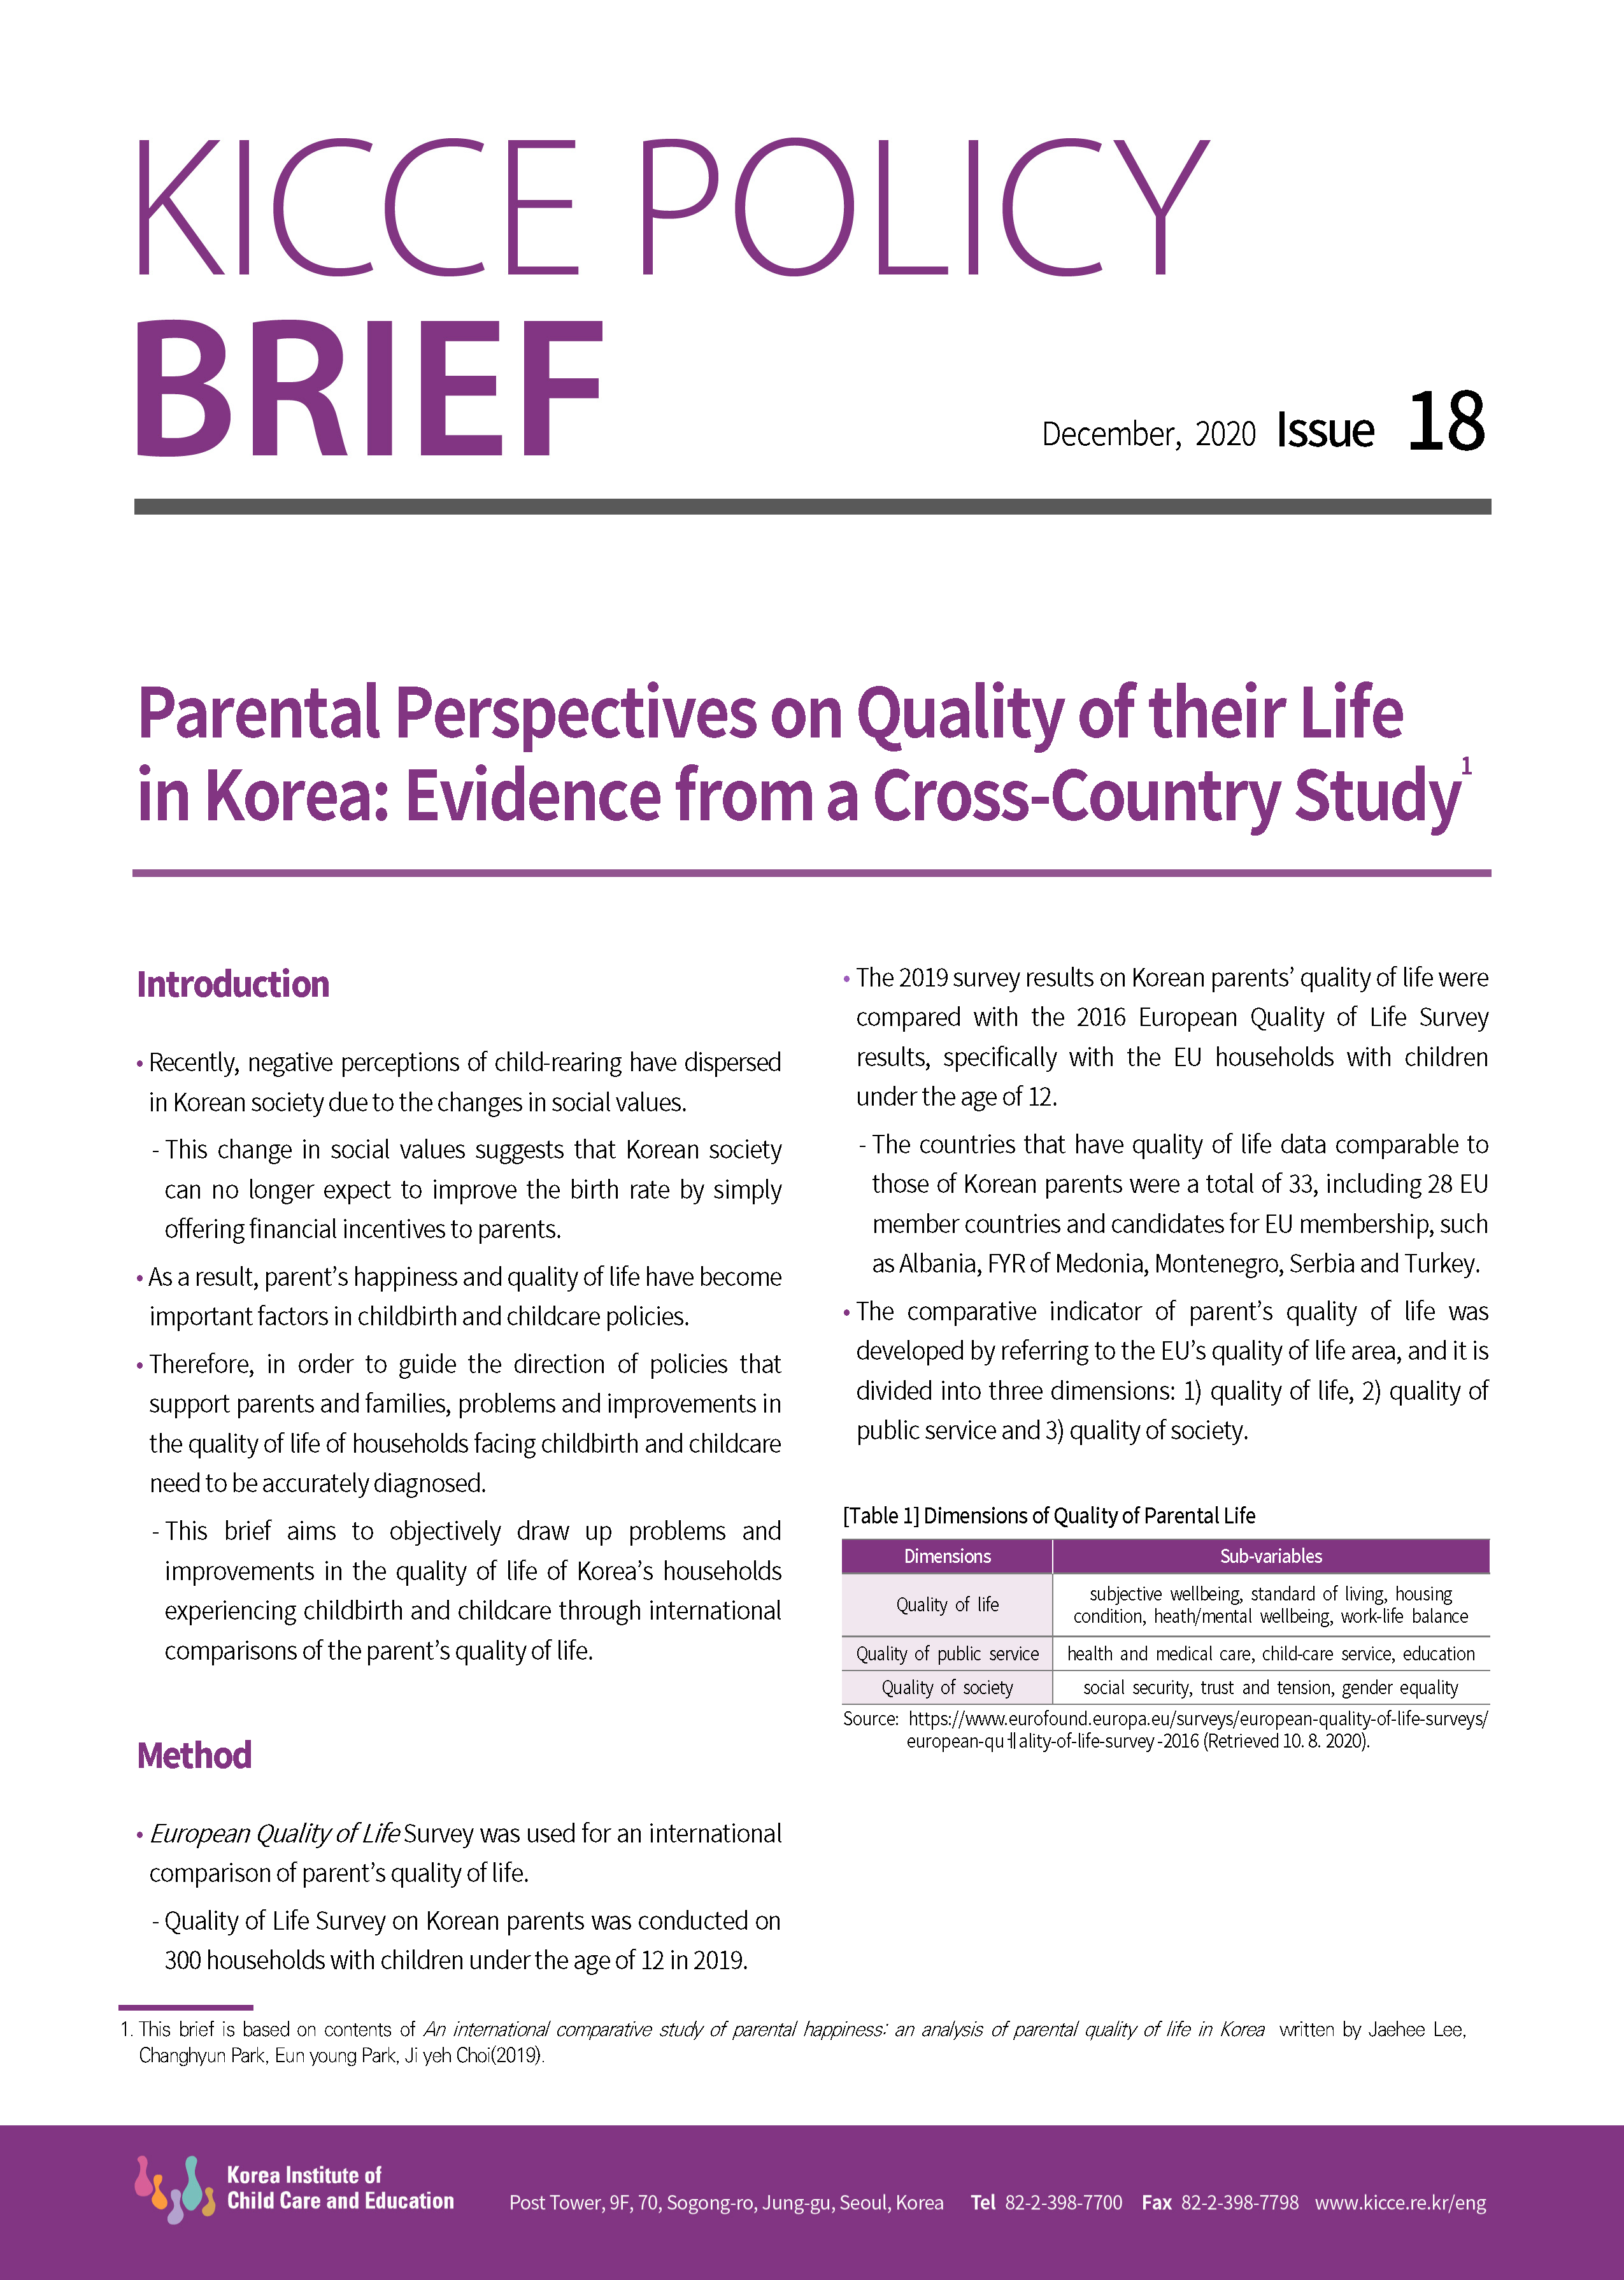 [Issue 18] Parental Perspectives on Quality of their Life in Korea: Evidence from a Cross-Country Study 관련 이미지 입니다.